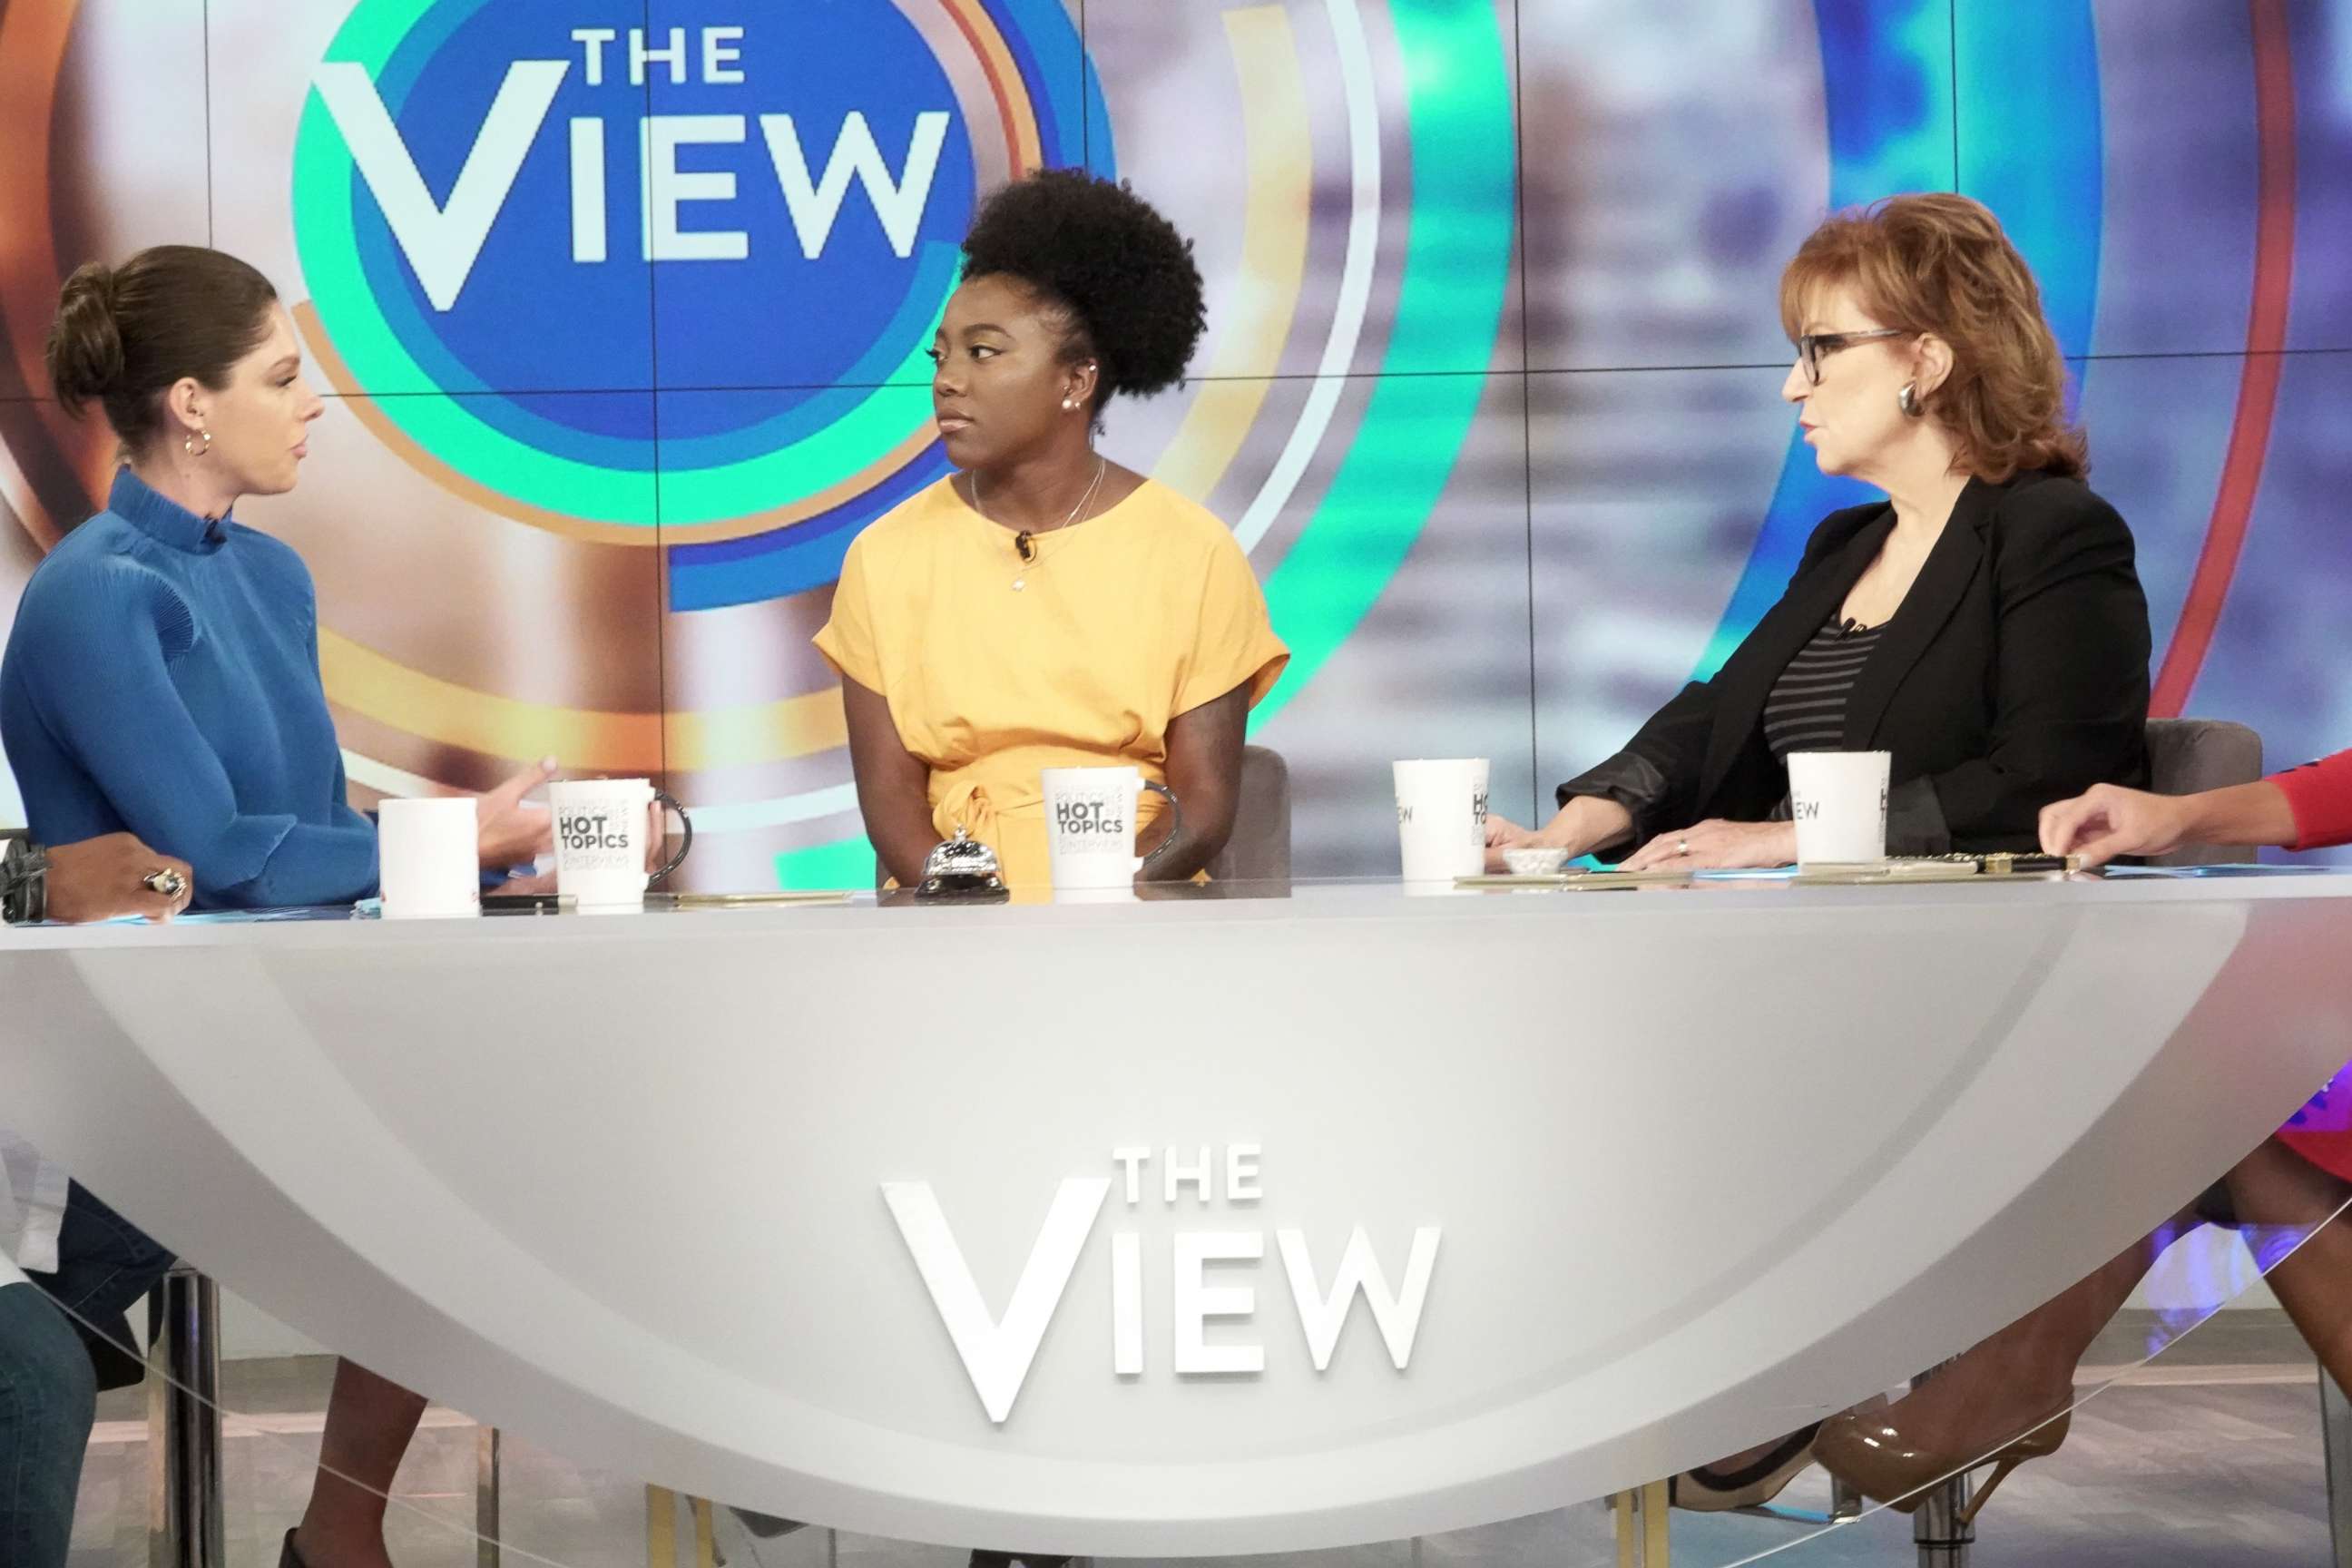 PHOTO: Tommia Dean joined "The View" today to discuss why she believes officials tried to stop the protest.